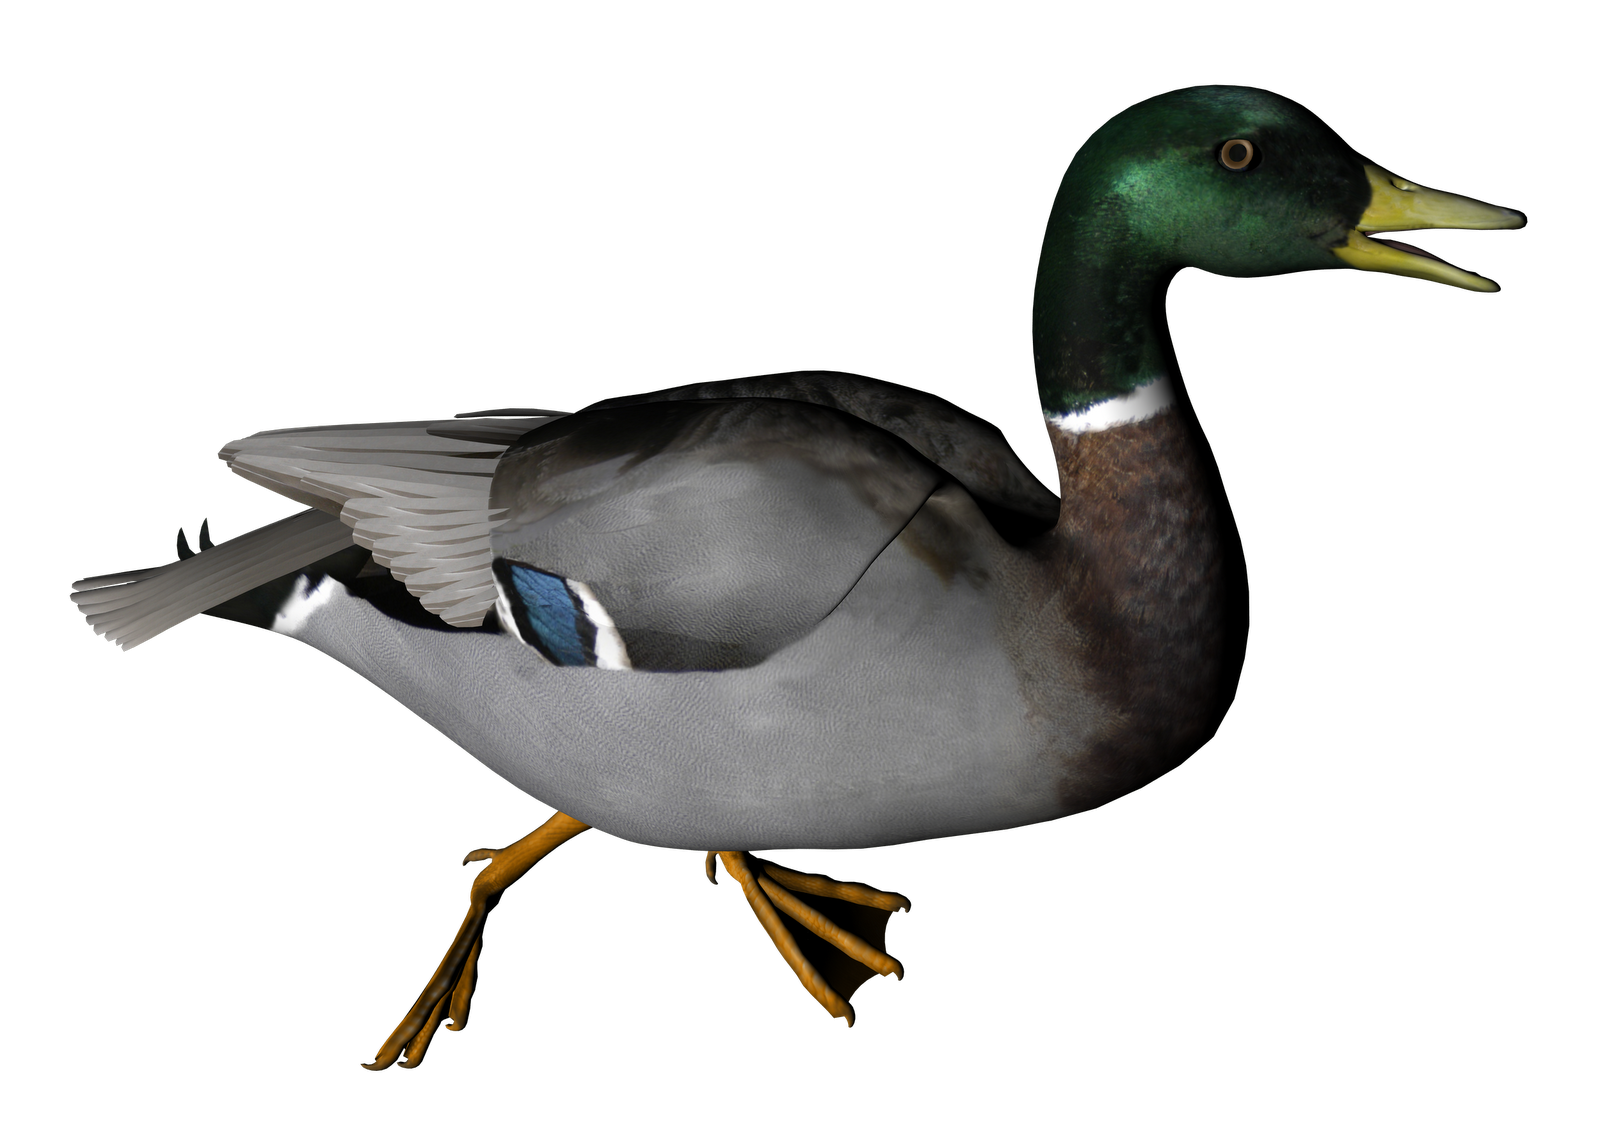 PNG File Name: Duck PlusPng.c